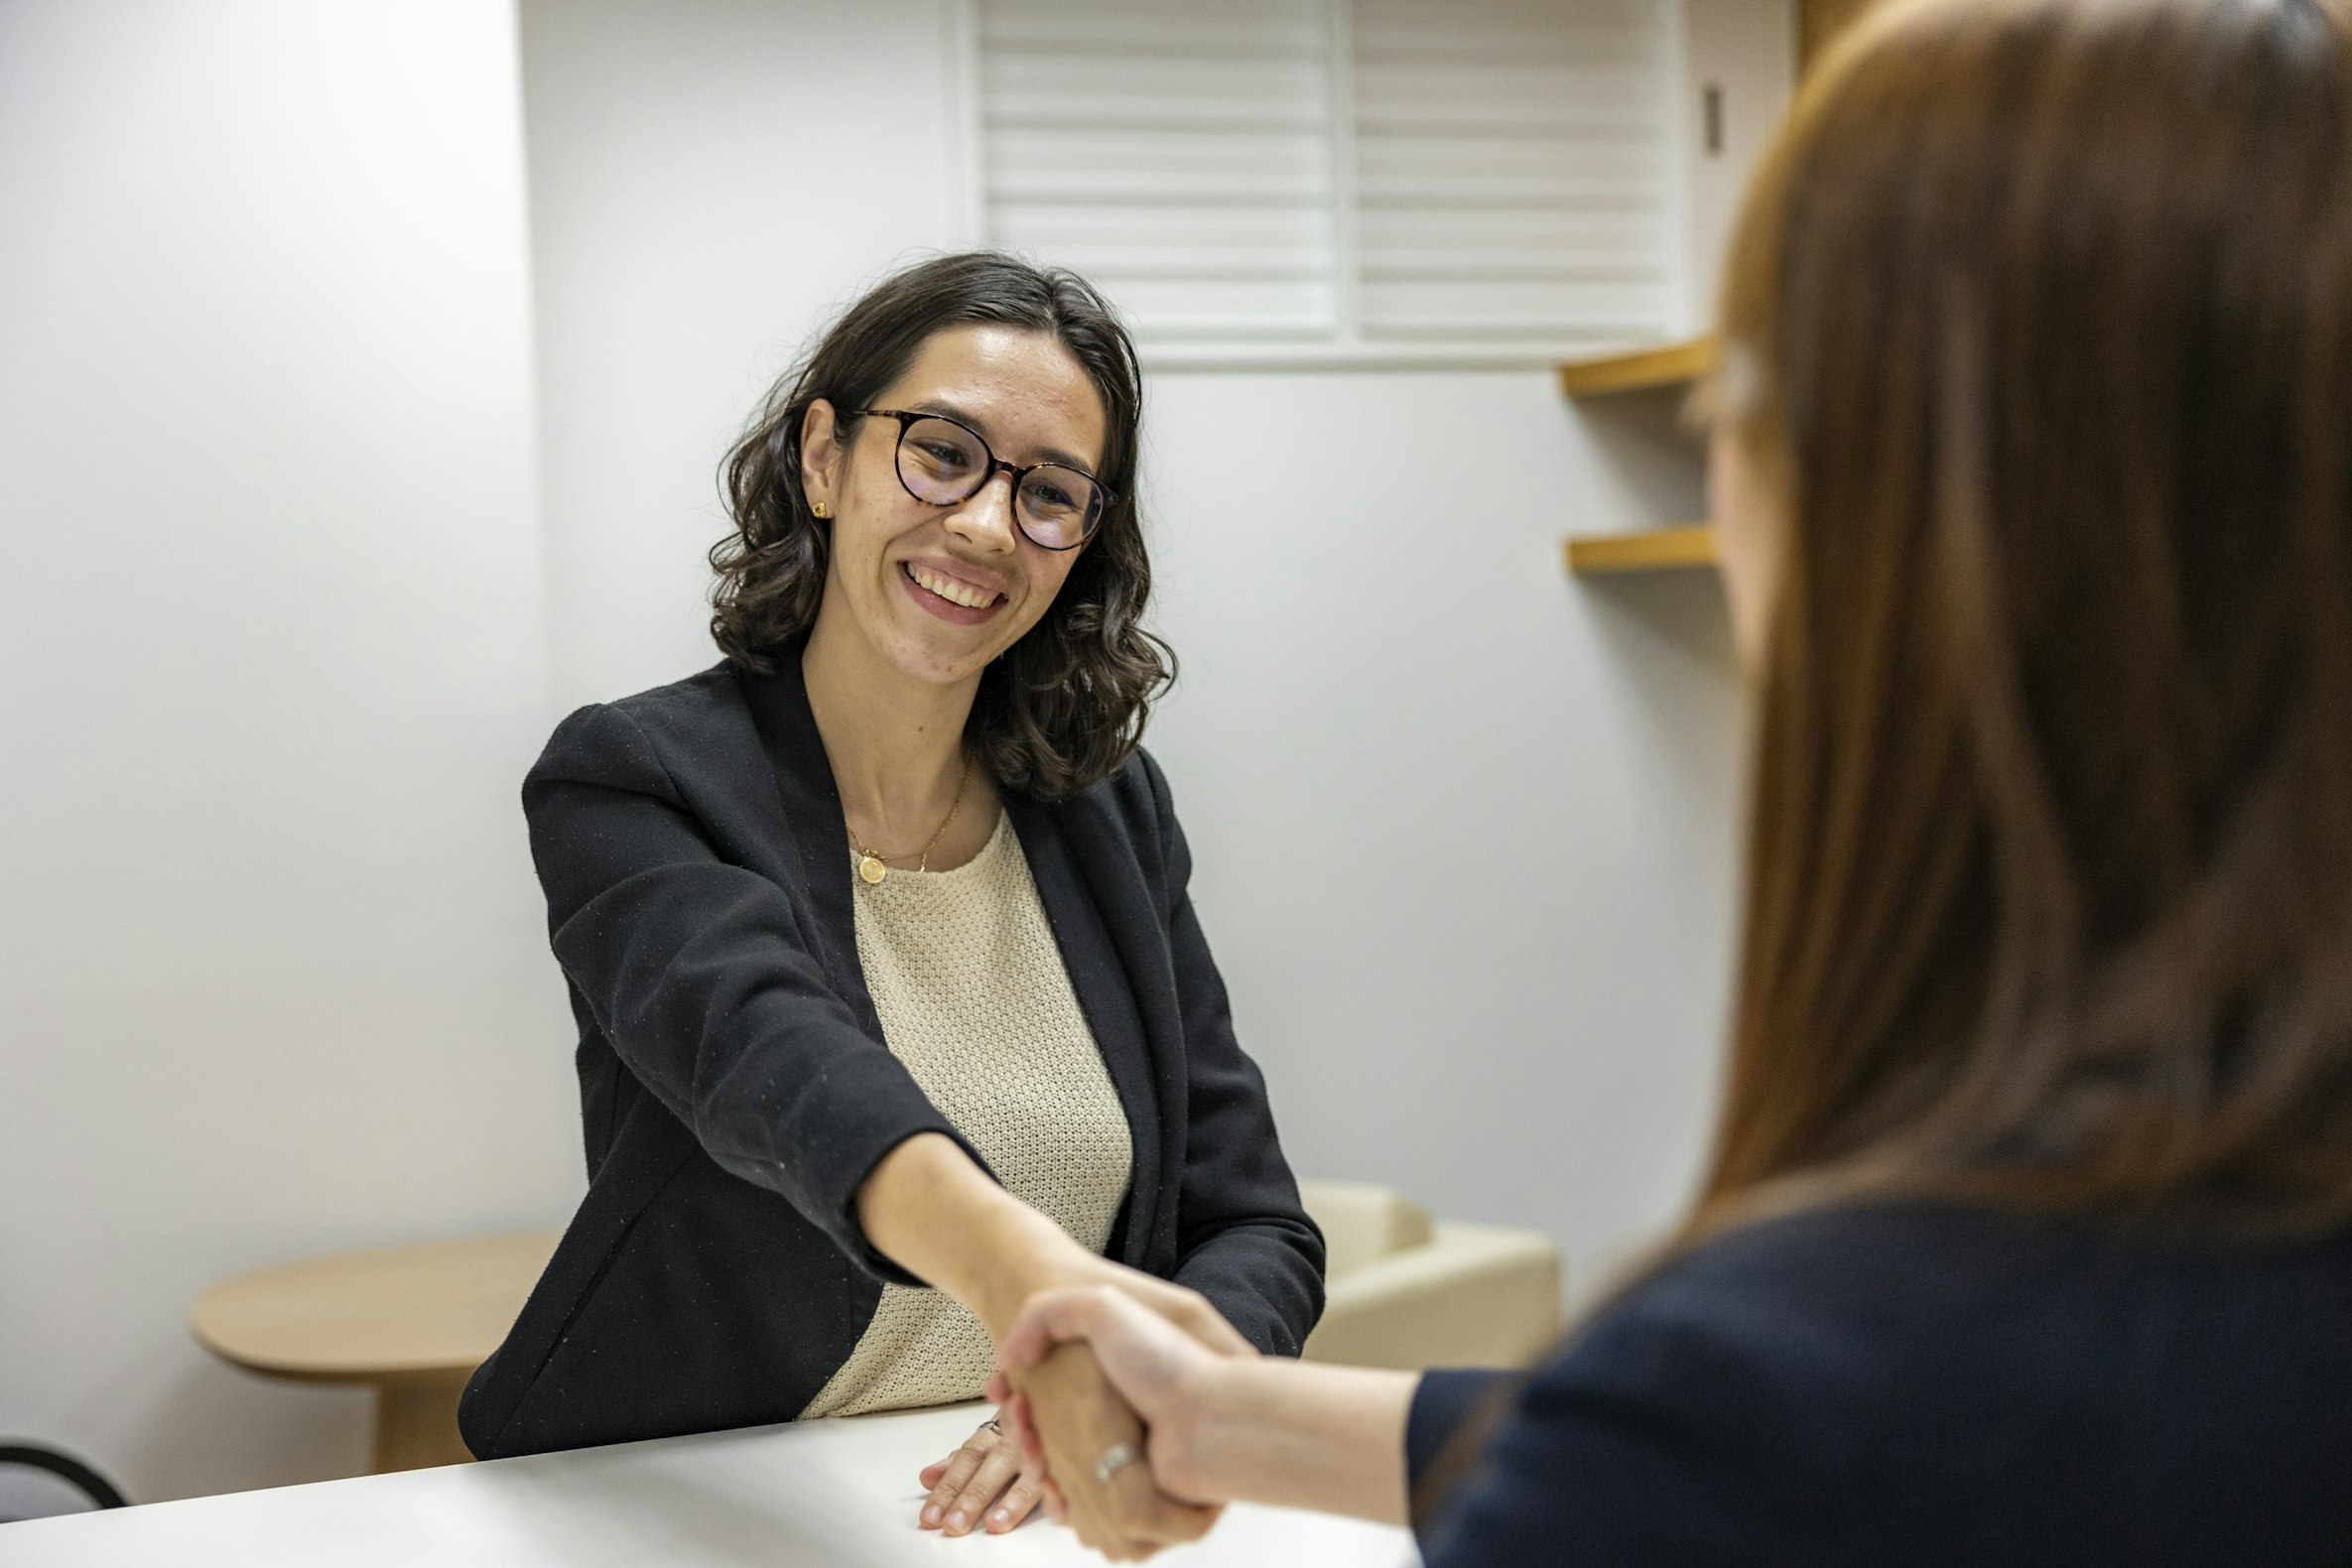 Practical Tips for Implementing Video Interviews in Your Hiring Process